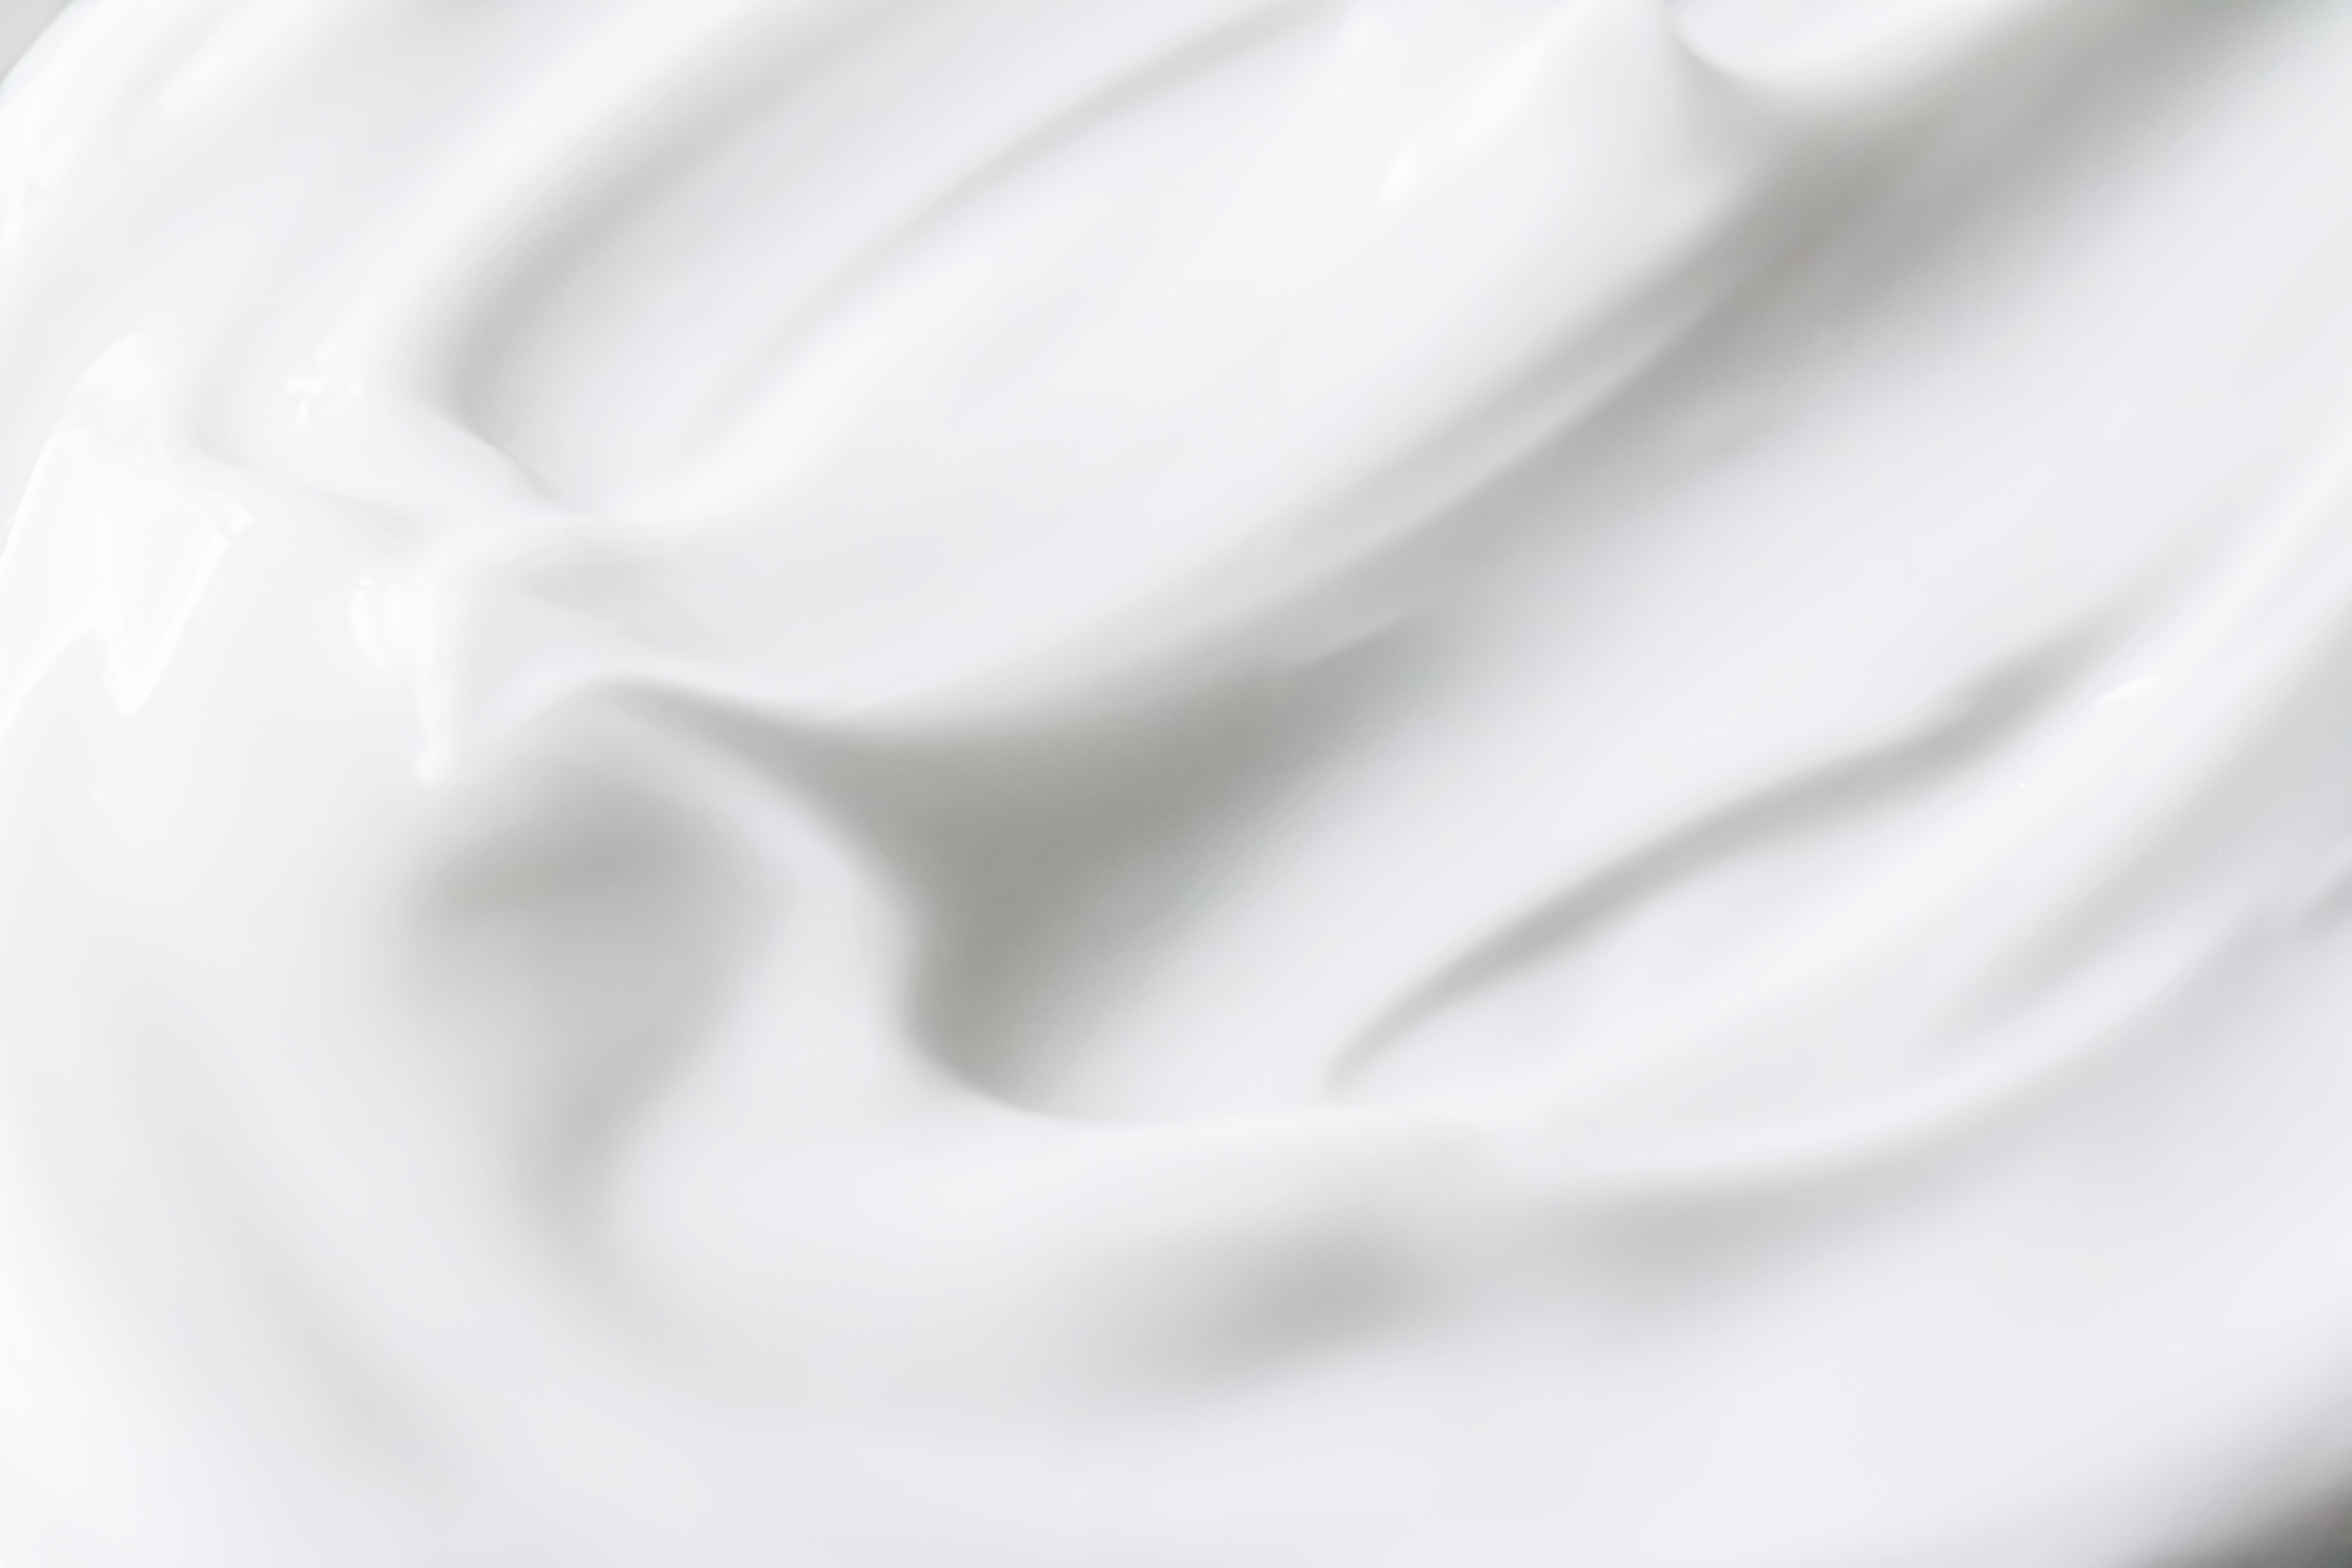 Pure White Cream Texture as Abstract Background, Food Substance or Organic Cosmetic